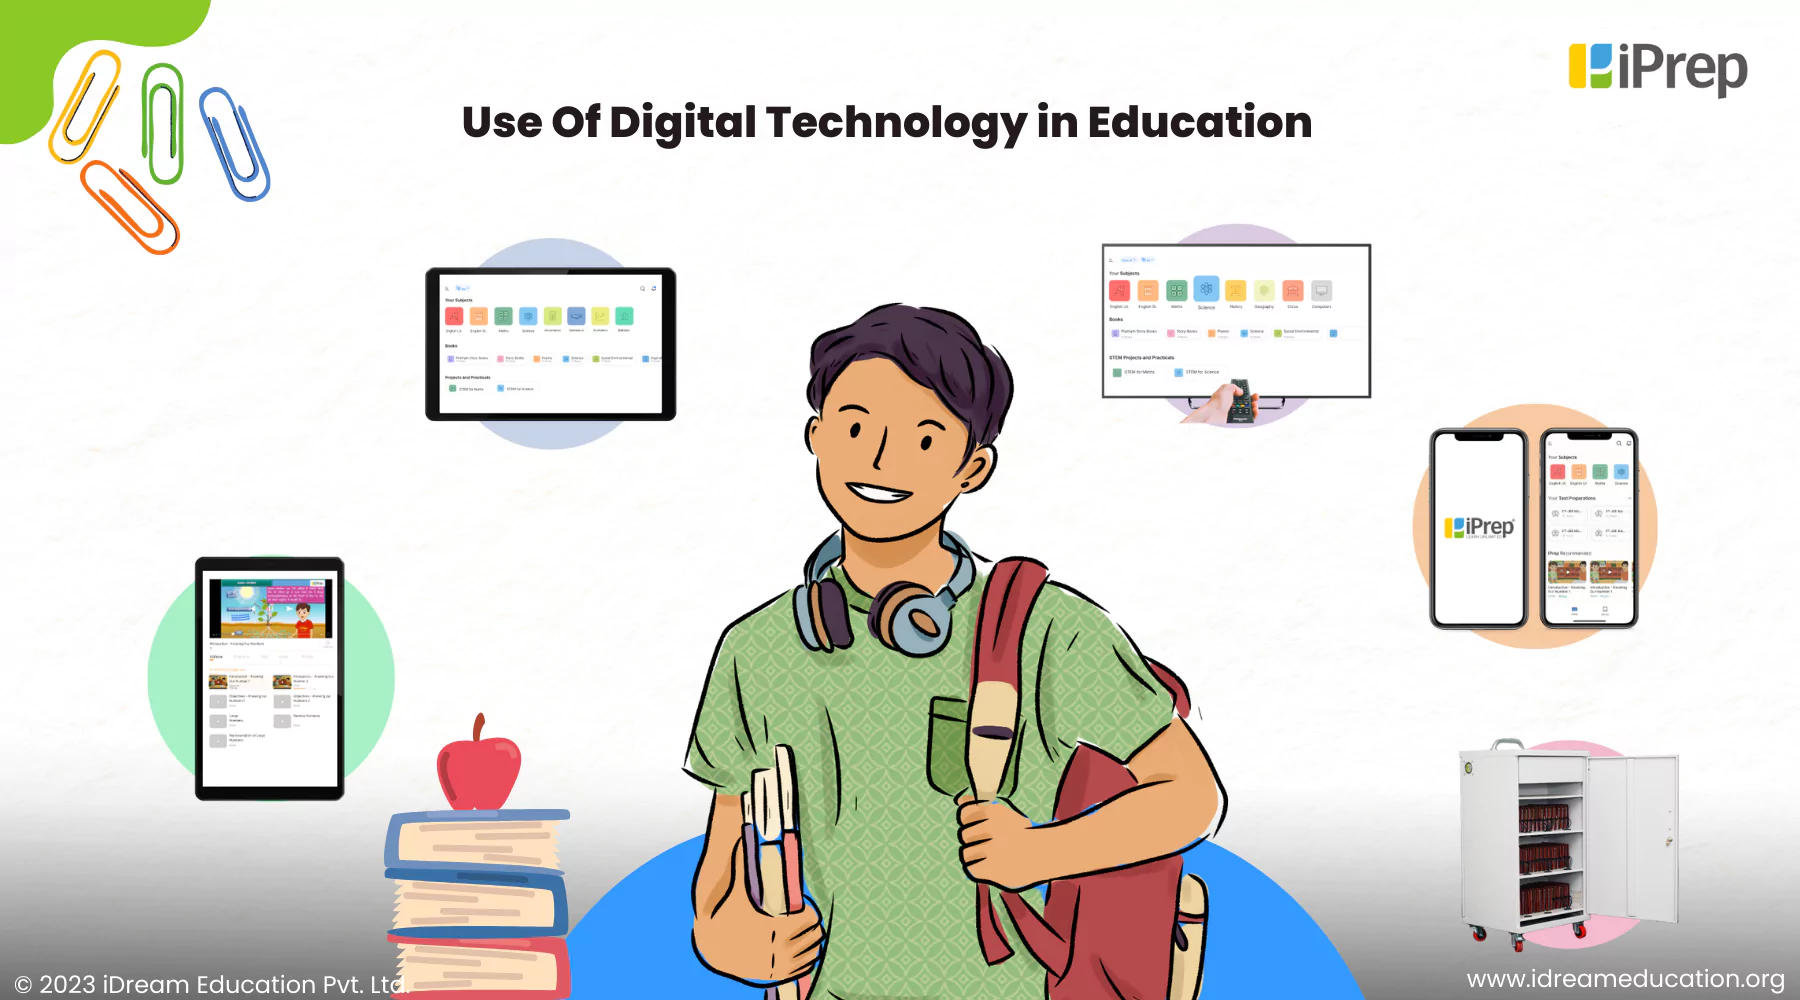 A visual depicting the various formats of using digital technology in education to supplement teaching and learning at schools.